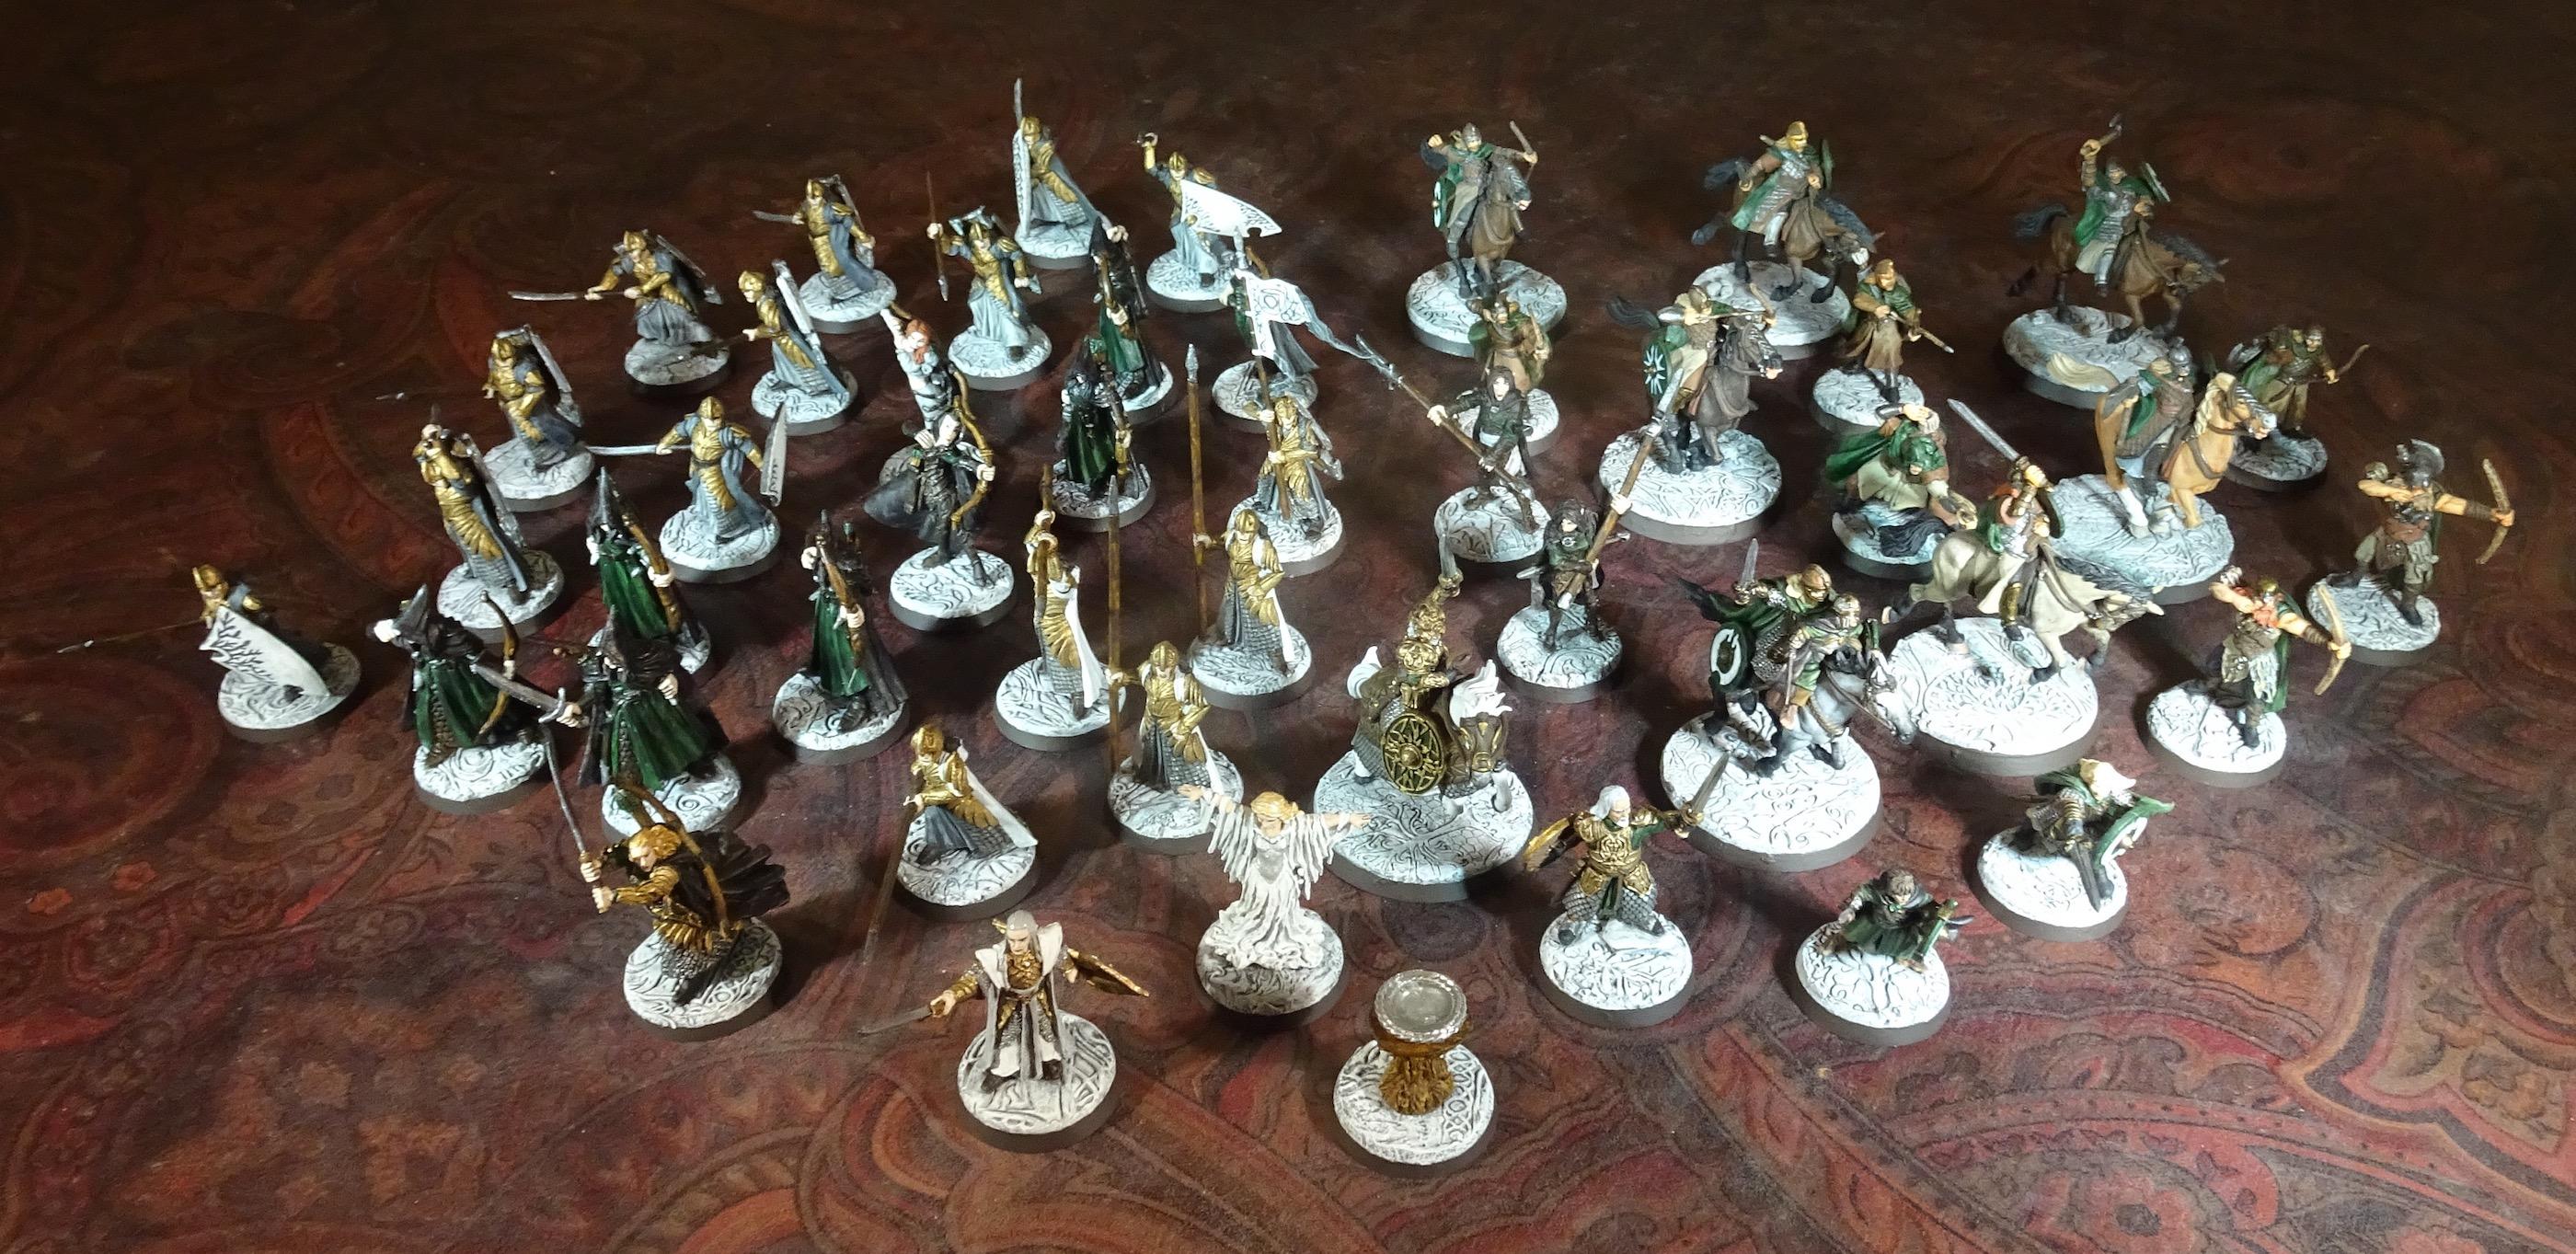 Lothlorien and Rohan Army